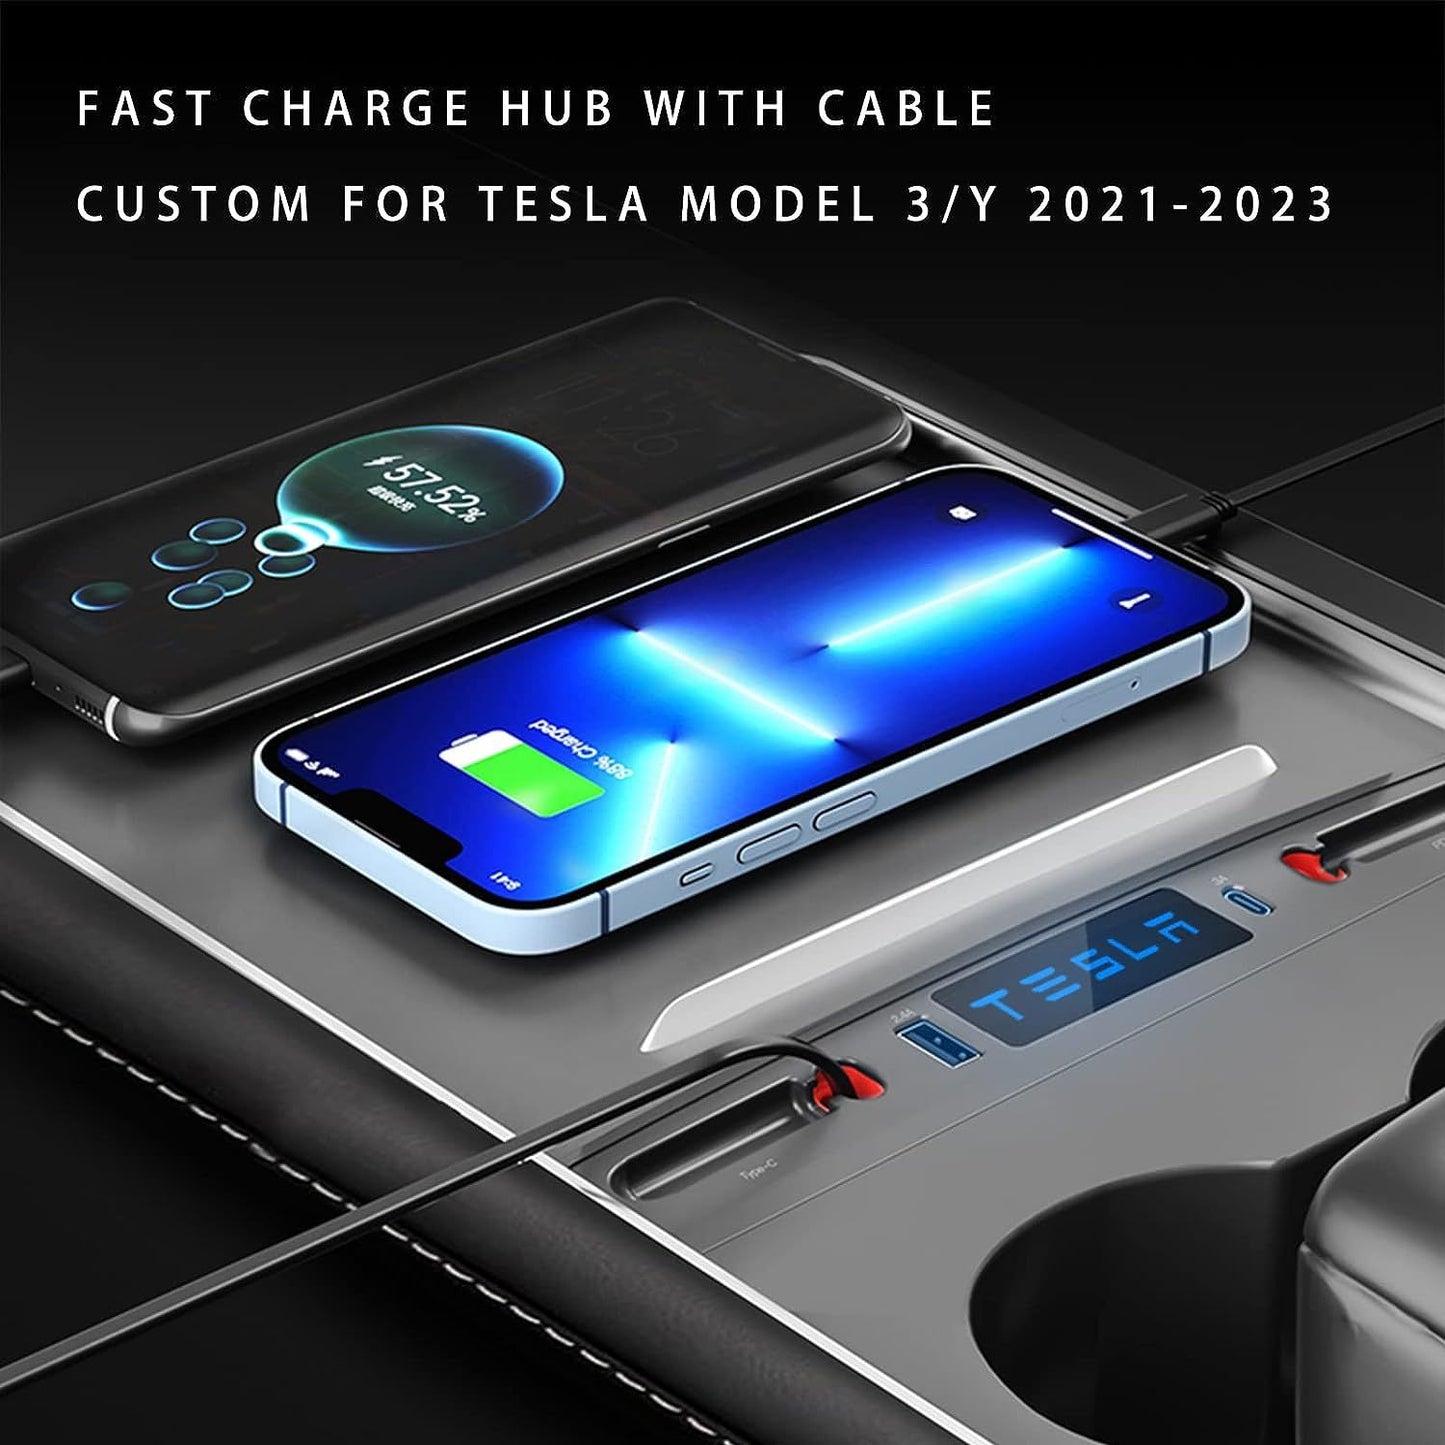 Tesla USB Hub Fast Charge with Cable Adapter for Tesla Model 3 Model Y